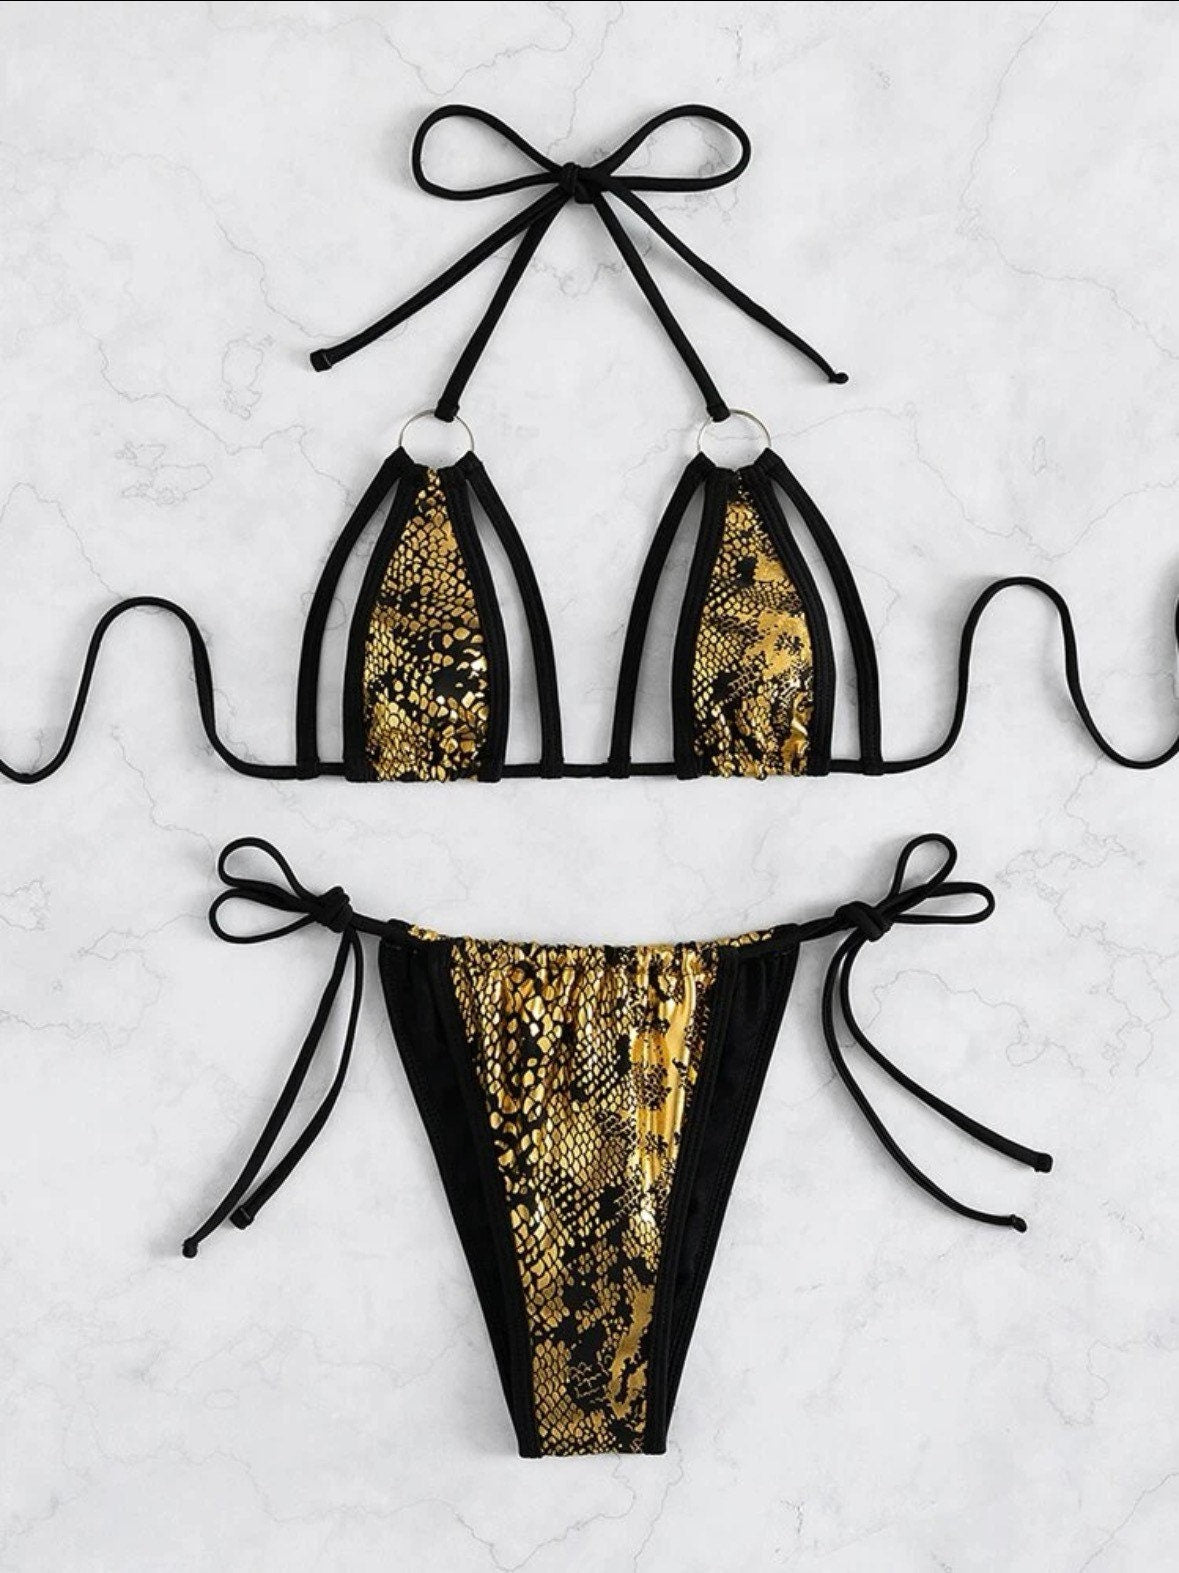 The Metallic gold snake print swim bikini with tie sides and snake black gold triangle cut out top tie and bottoms ring linked swimsuit set